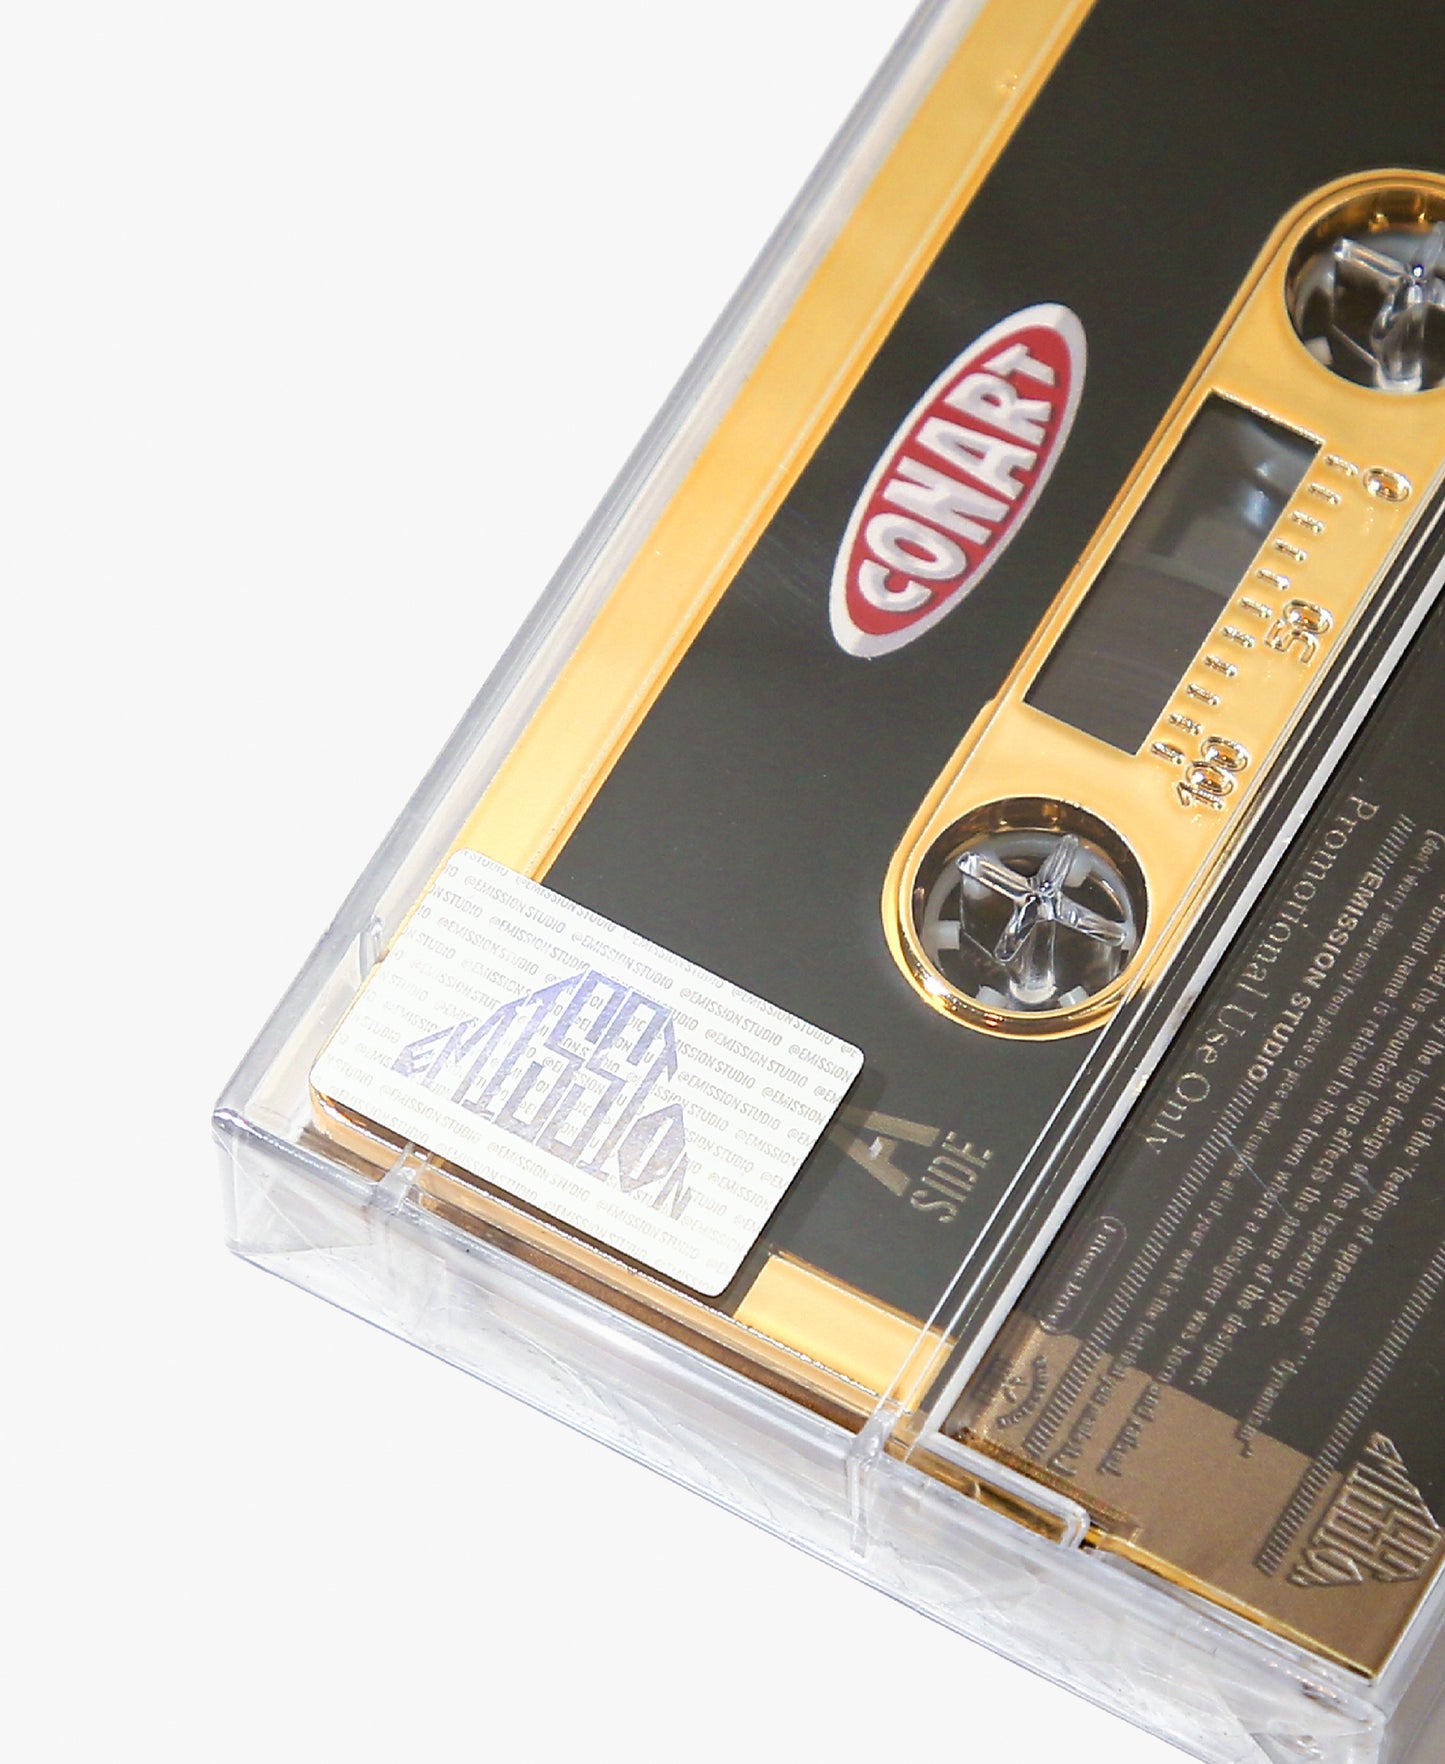 [CASSETTE TAPE] The Notorious BIG Mix